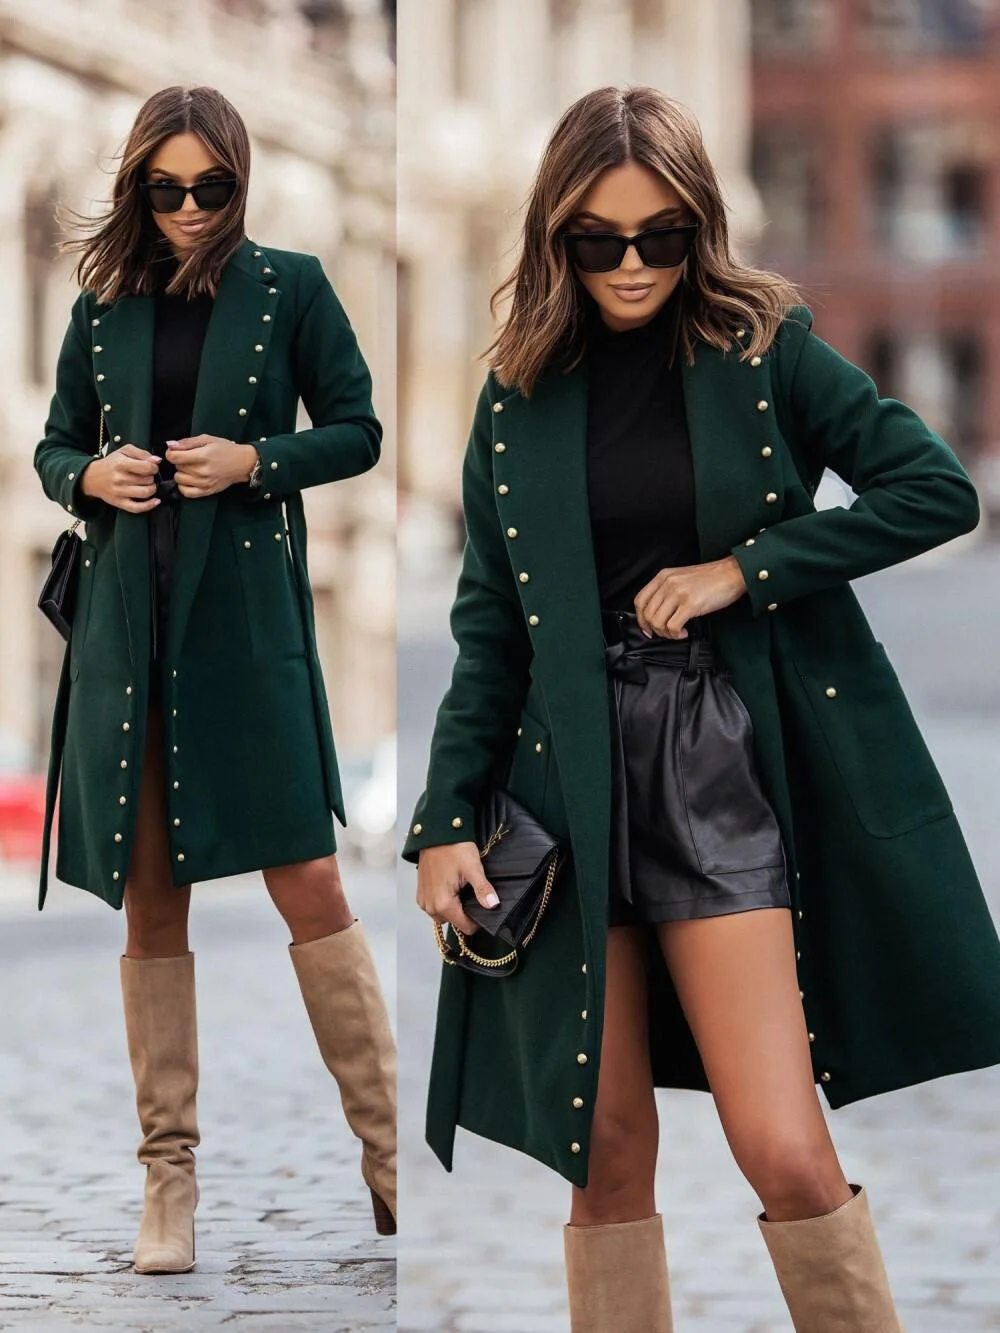 

Women Long Sleeve Autumn Winter Fashion Rivets Solid Color Trench Coat Casual High Waist Wool Coat